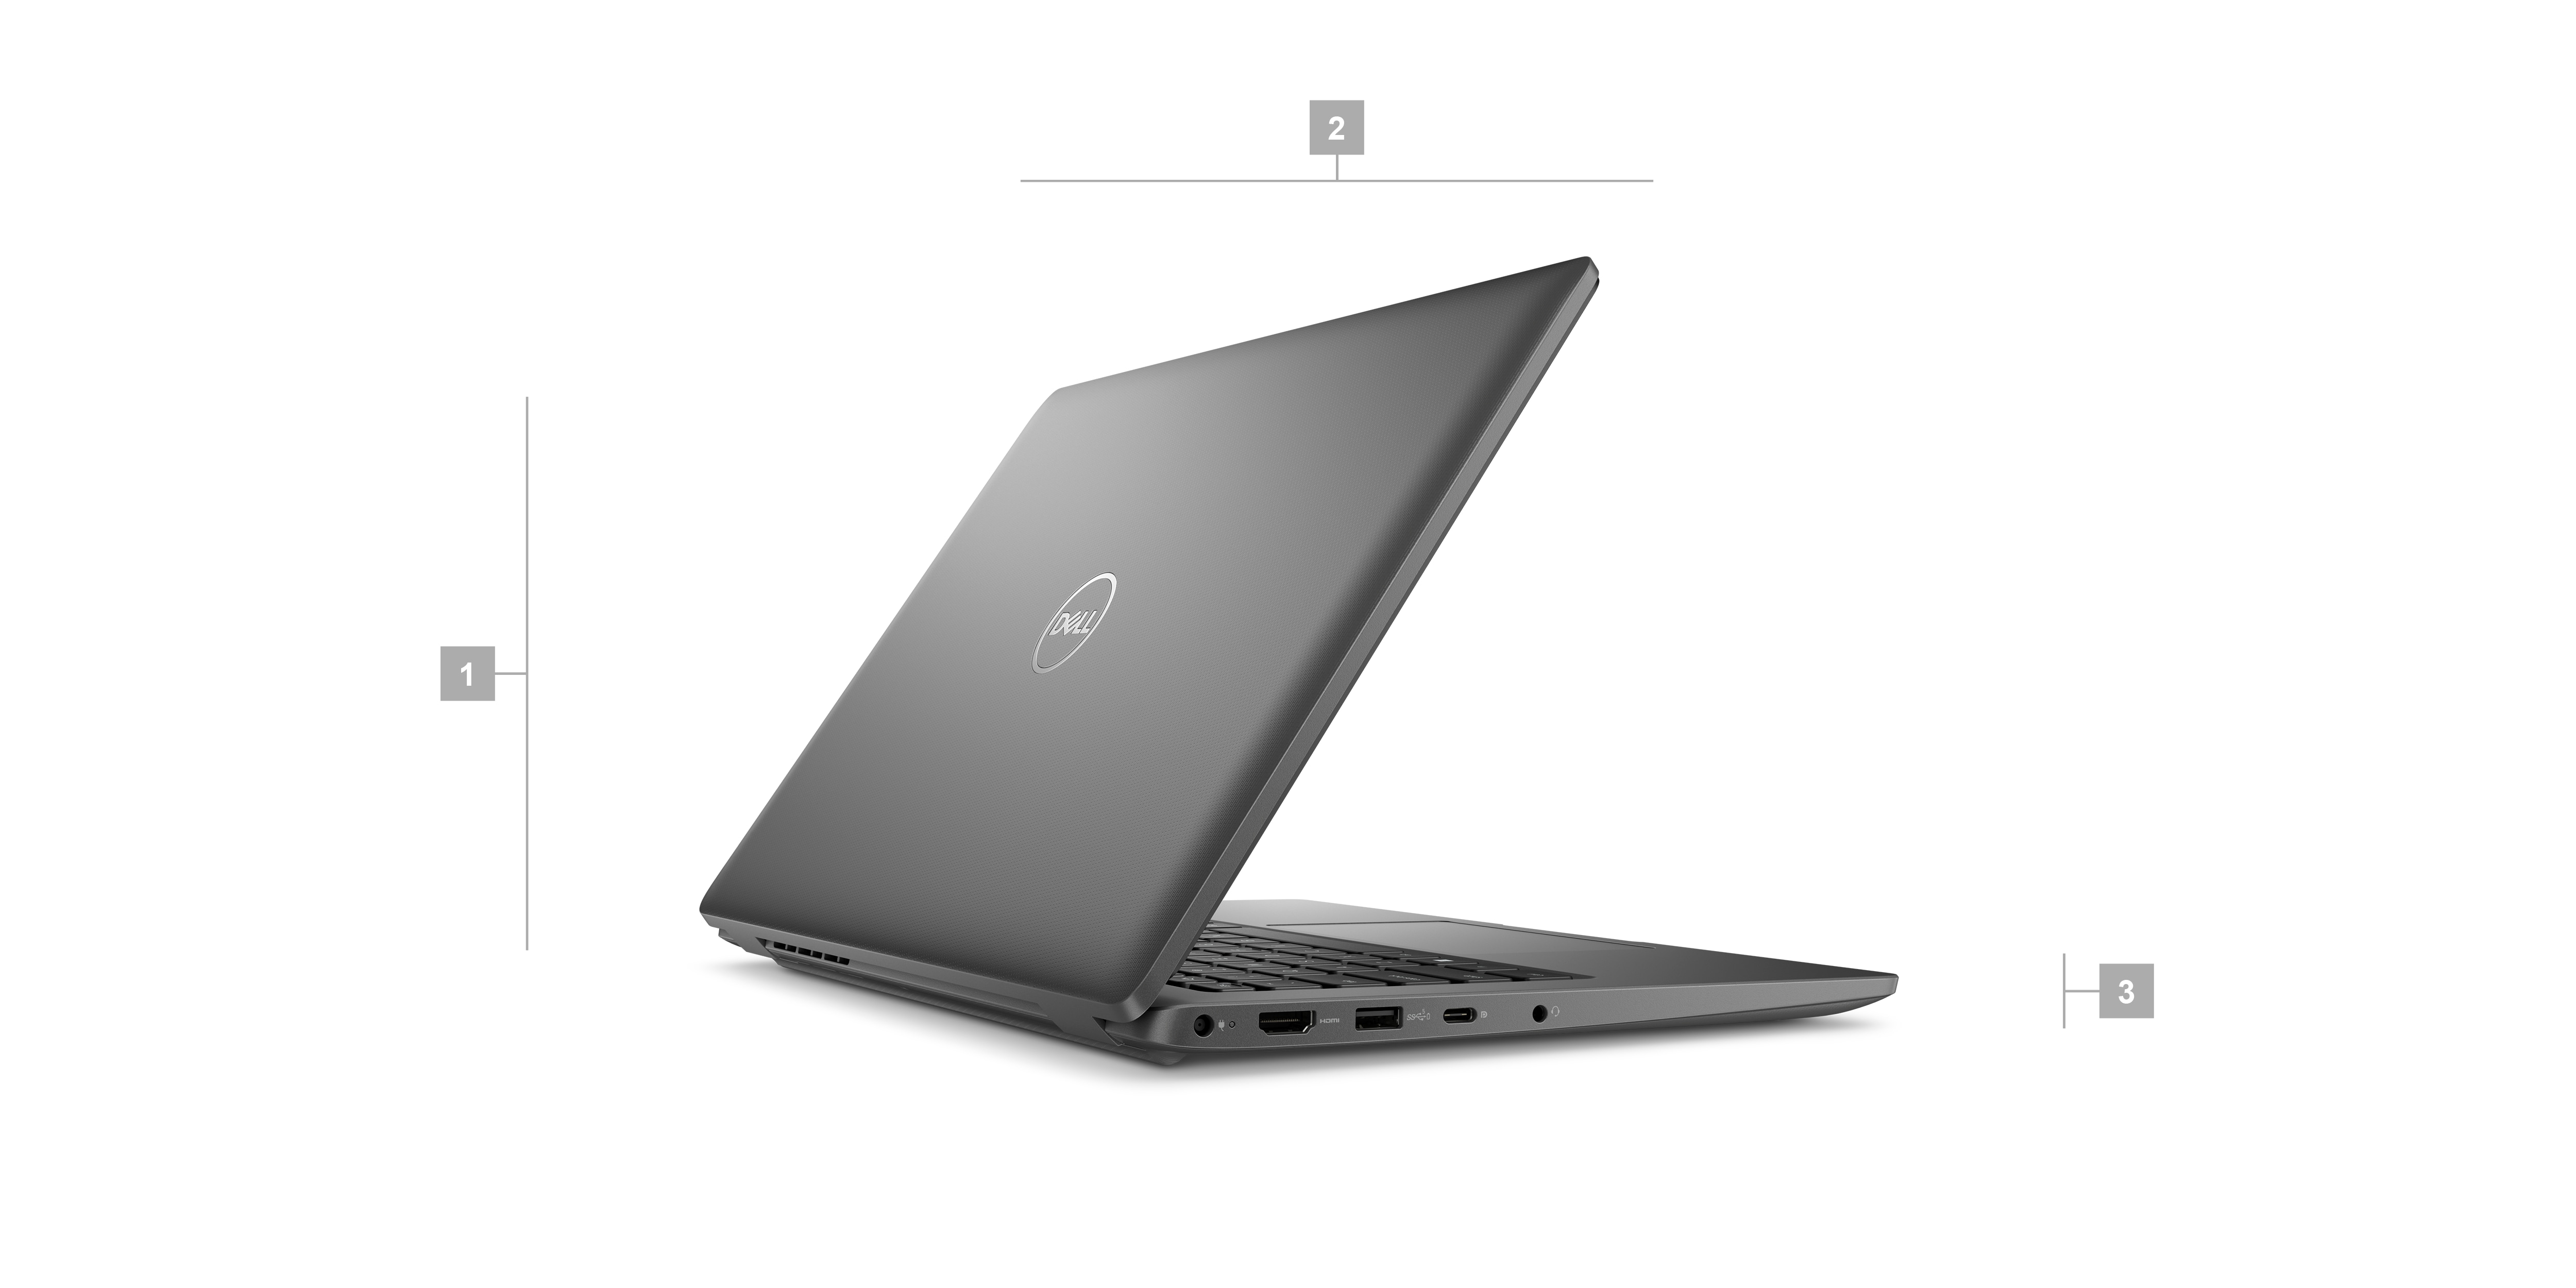 Dell Latitude 3440 Laptop with numbers from 1 to 3 showing the product dimensions and weight